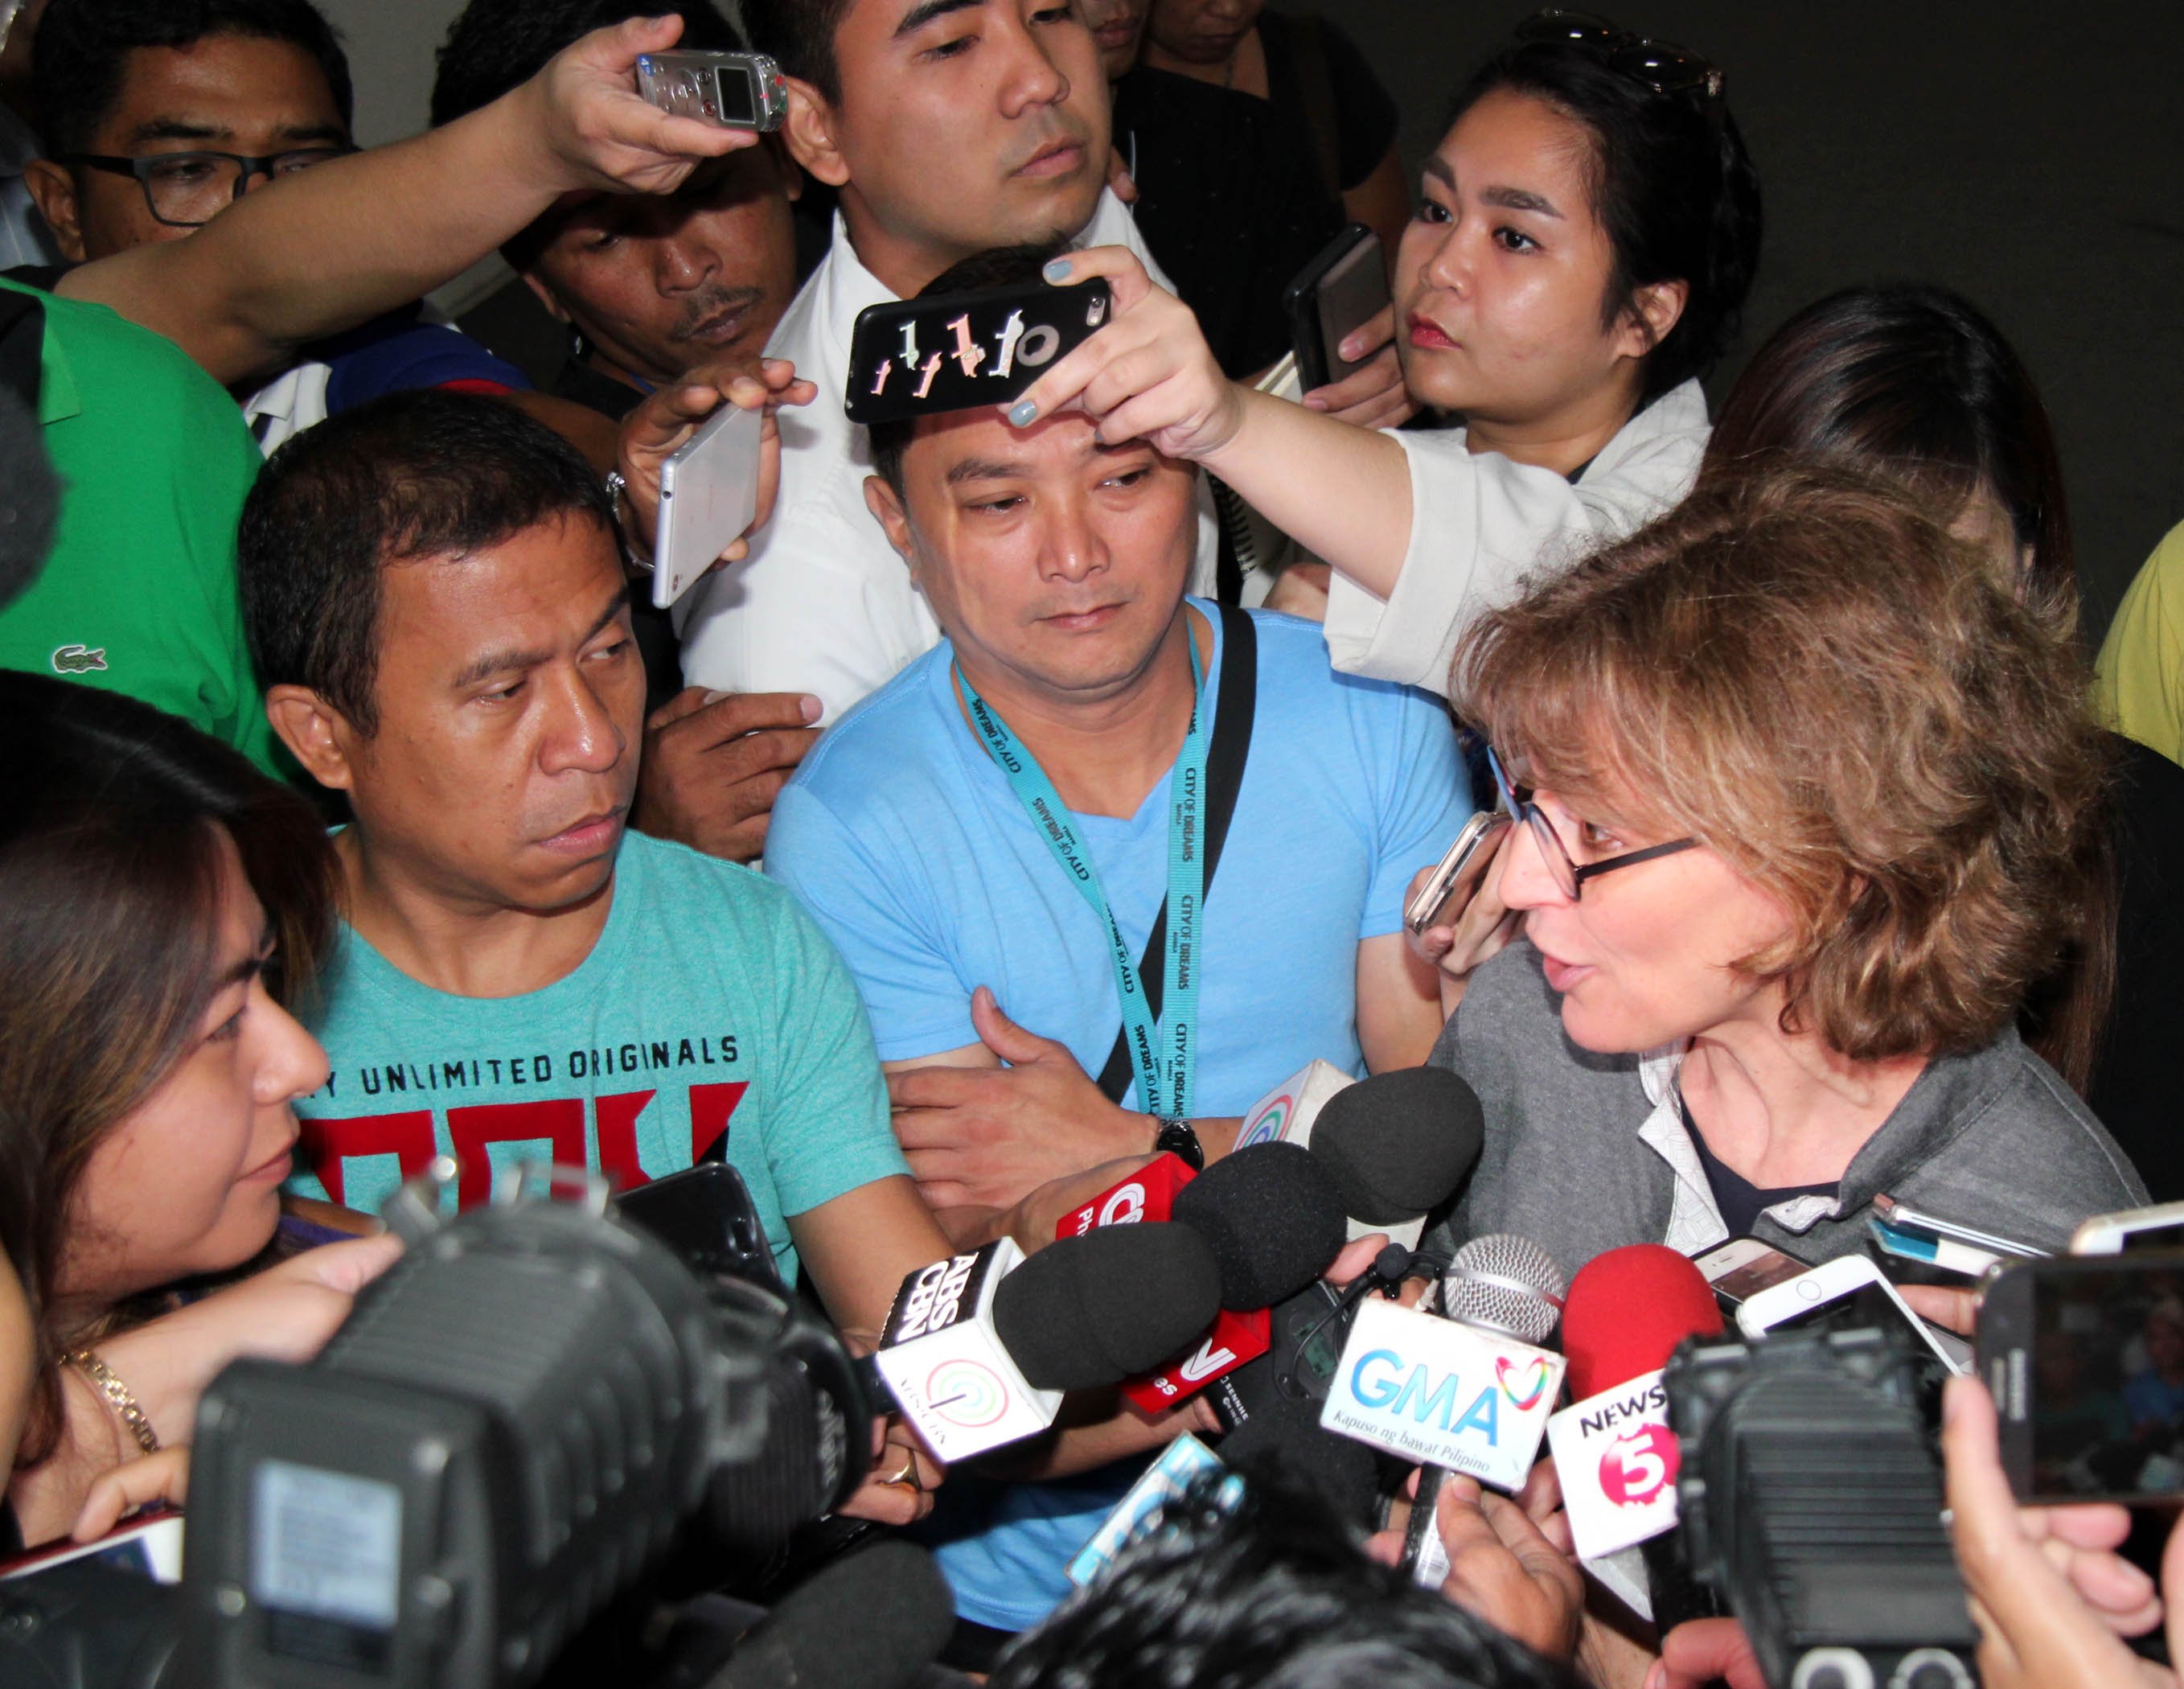 CALLAMARD AT POLICY FORUM. UN rapporteur says committed to conduct official visit to PHL